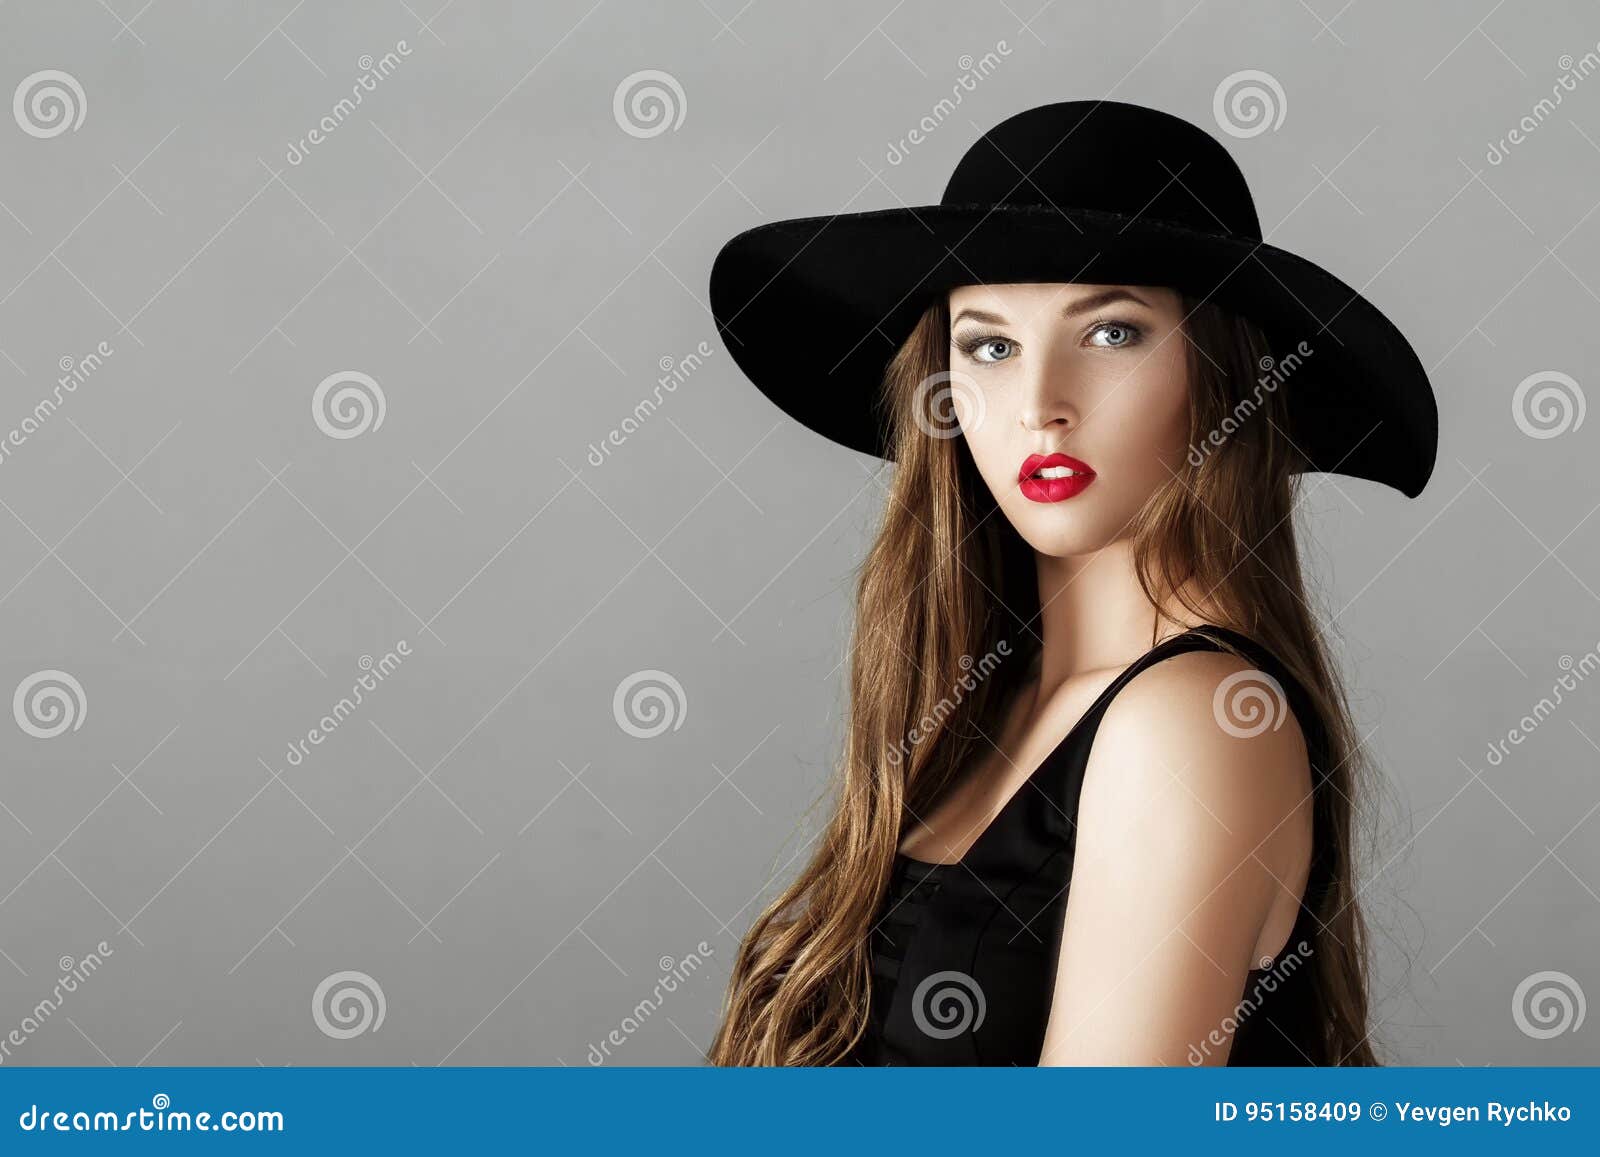 Beautiful Woman with Red Lipstick in Black Hat Stock Image - Image of ...